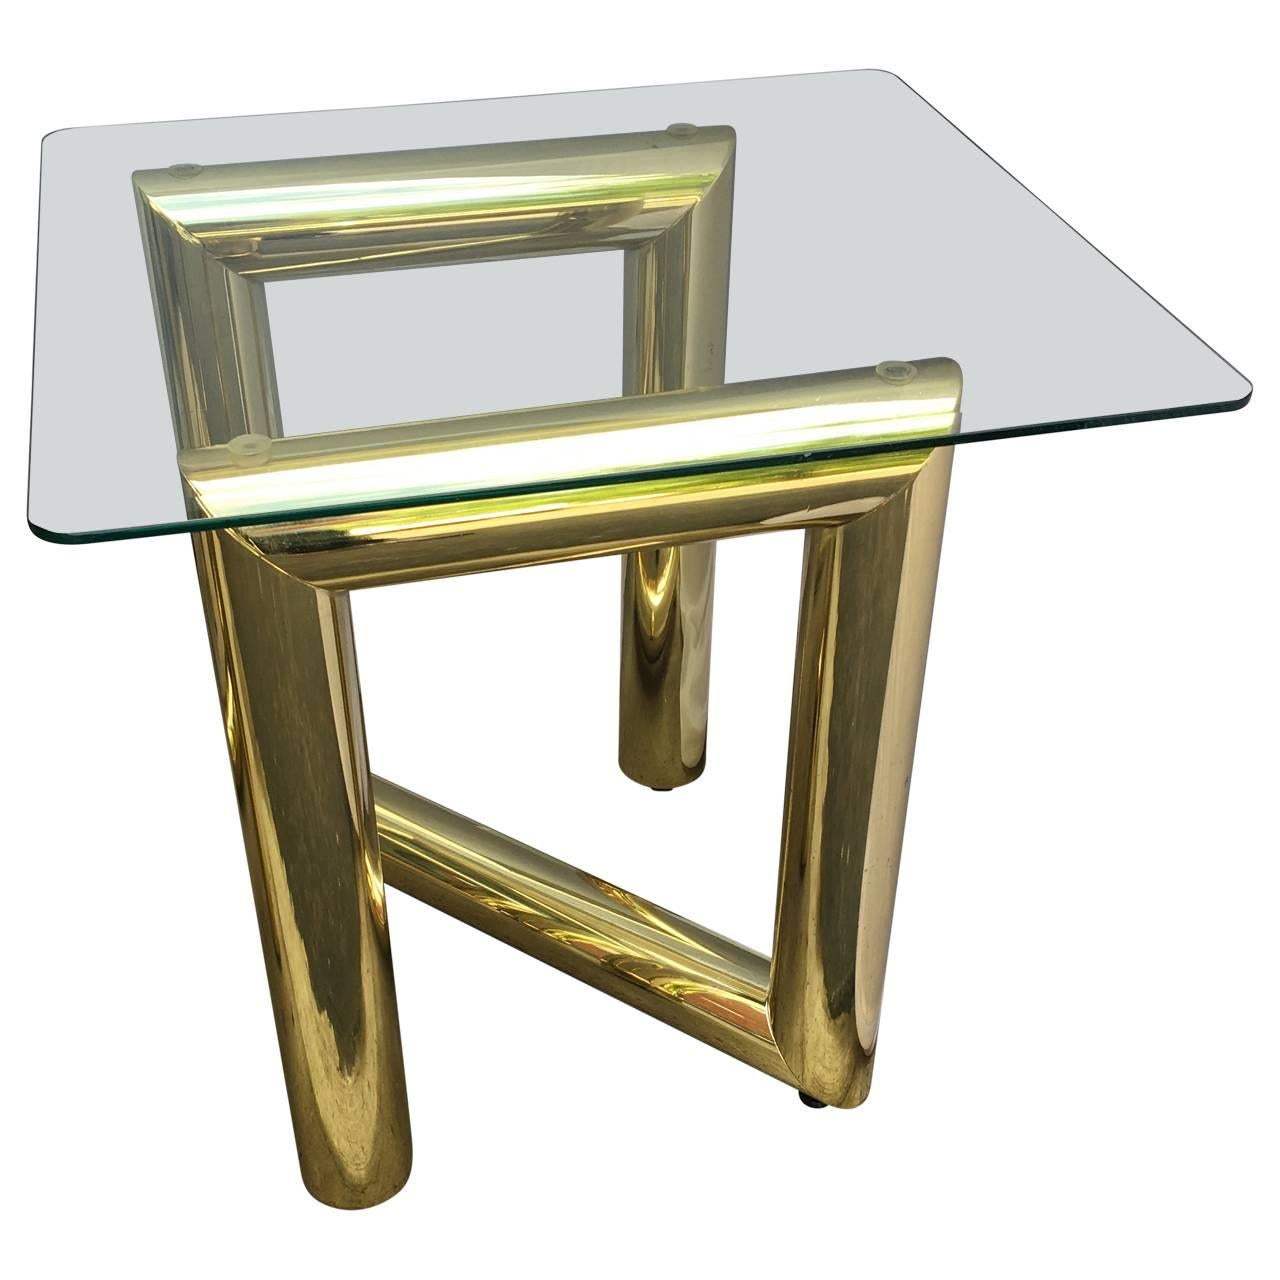 Two tubular brass-lacquered and glass-top side tables.